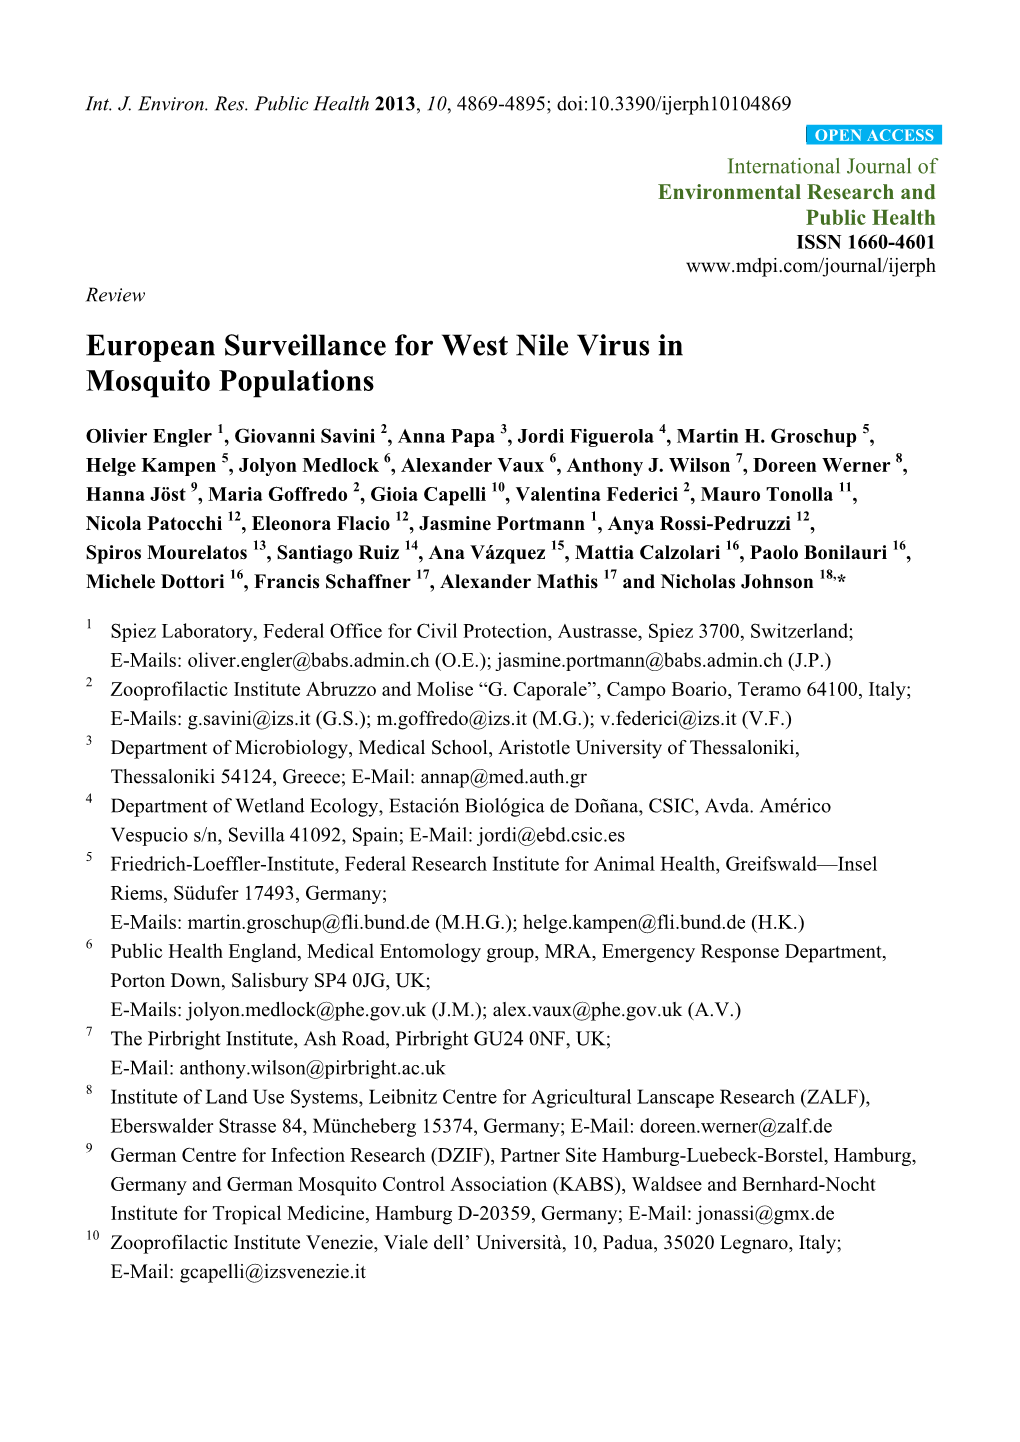 European Surveillance for West Nile Virus in Mosquito Populations